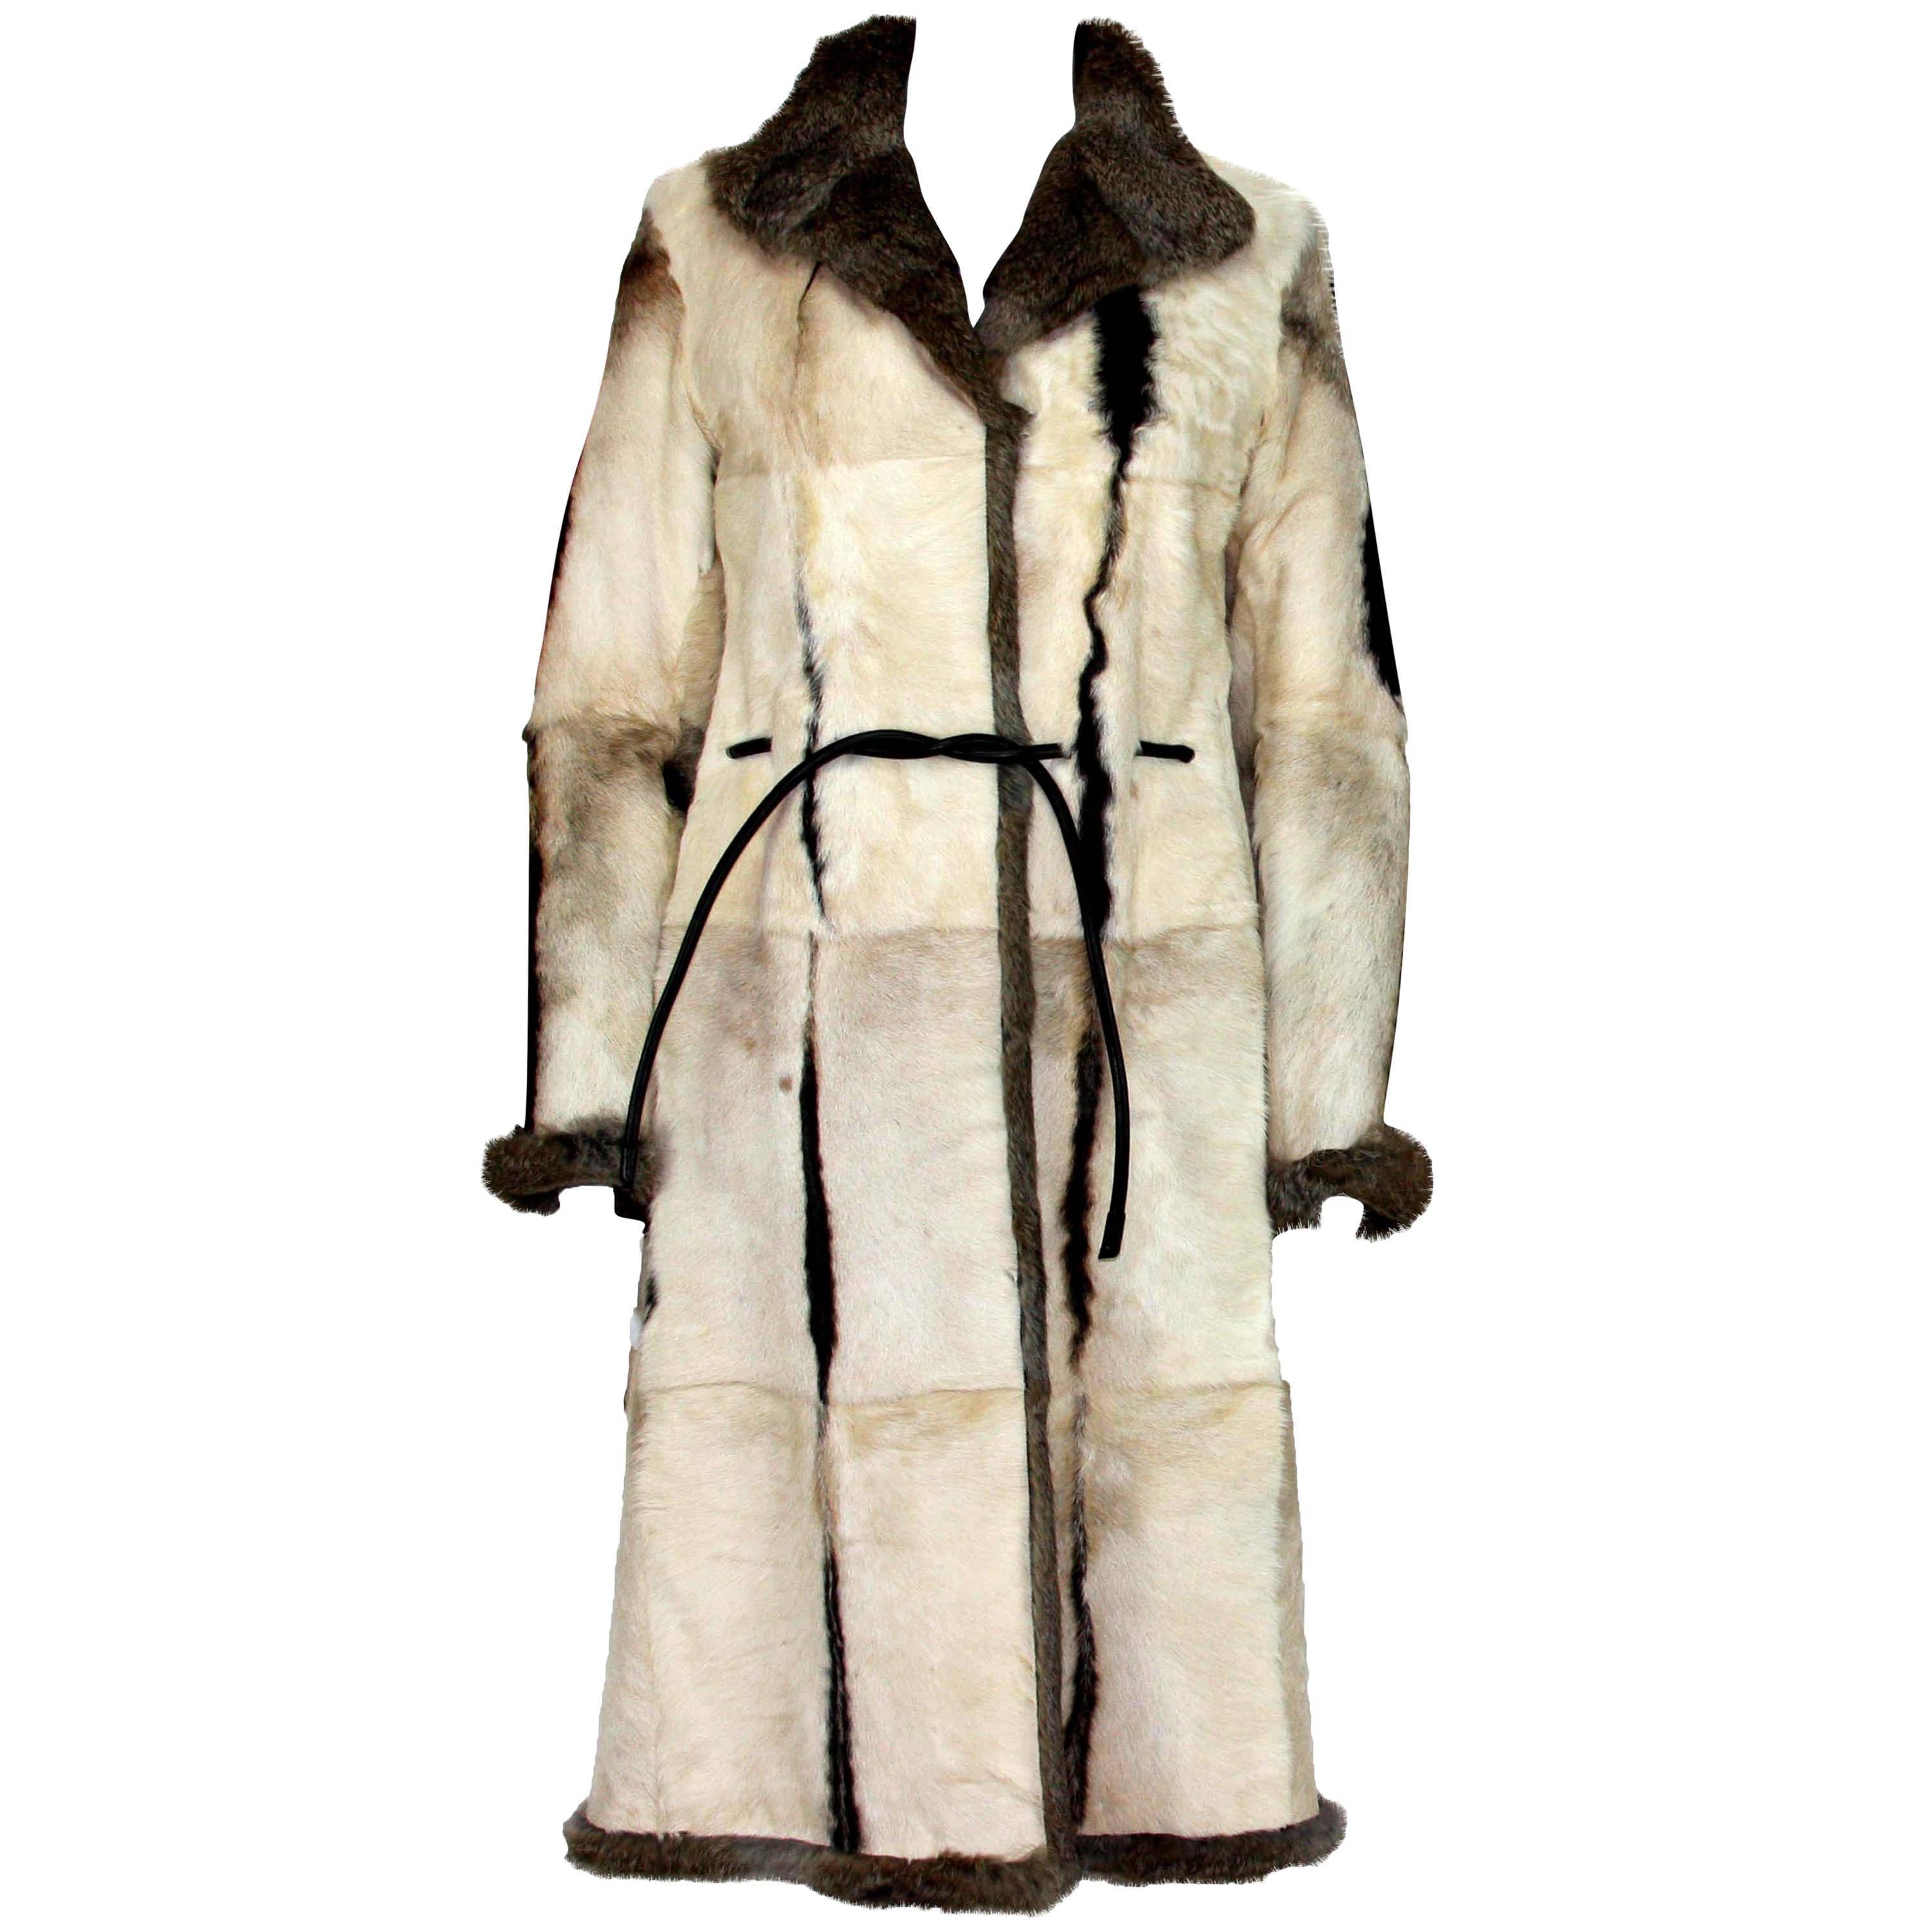 Tom Ford for Gucci Reversible Beige Fur Coat It.40